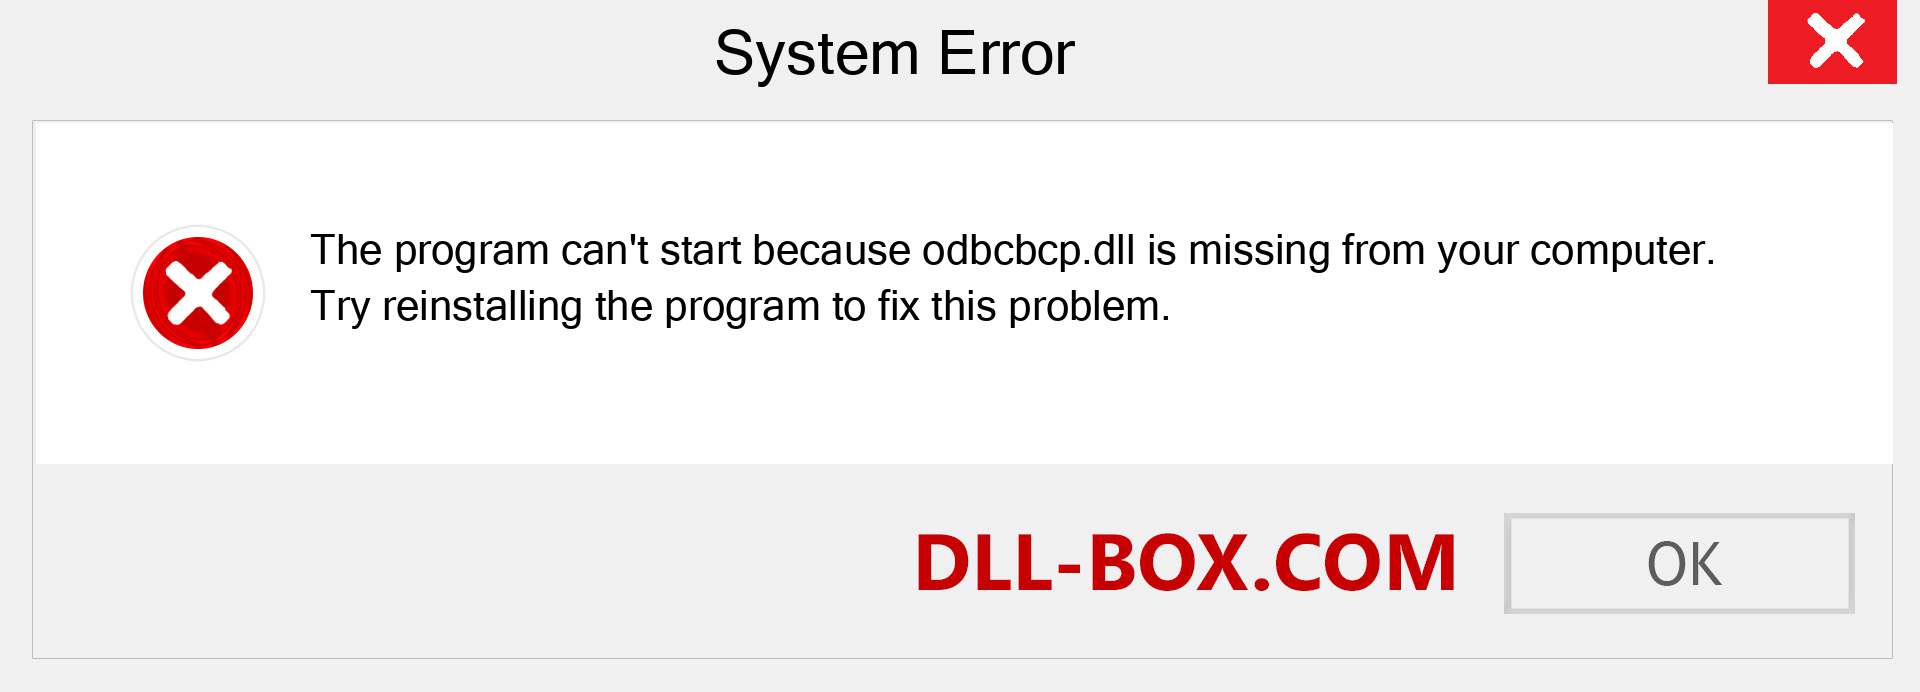  odbcbcp.dll file is missing?. Download for Windows 7, 8, 10 - Fix  odbcbcp dll Missing Error on Windows, photos, images